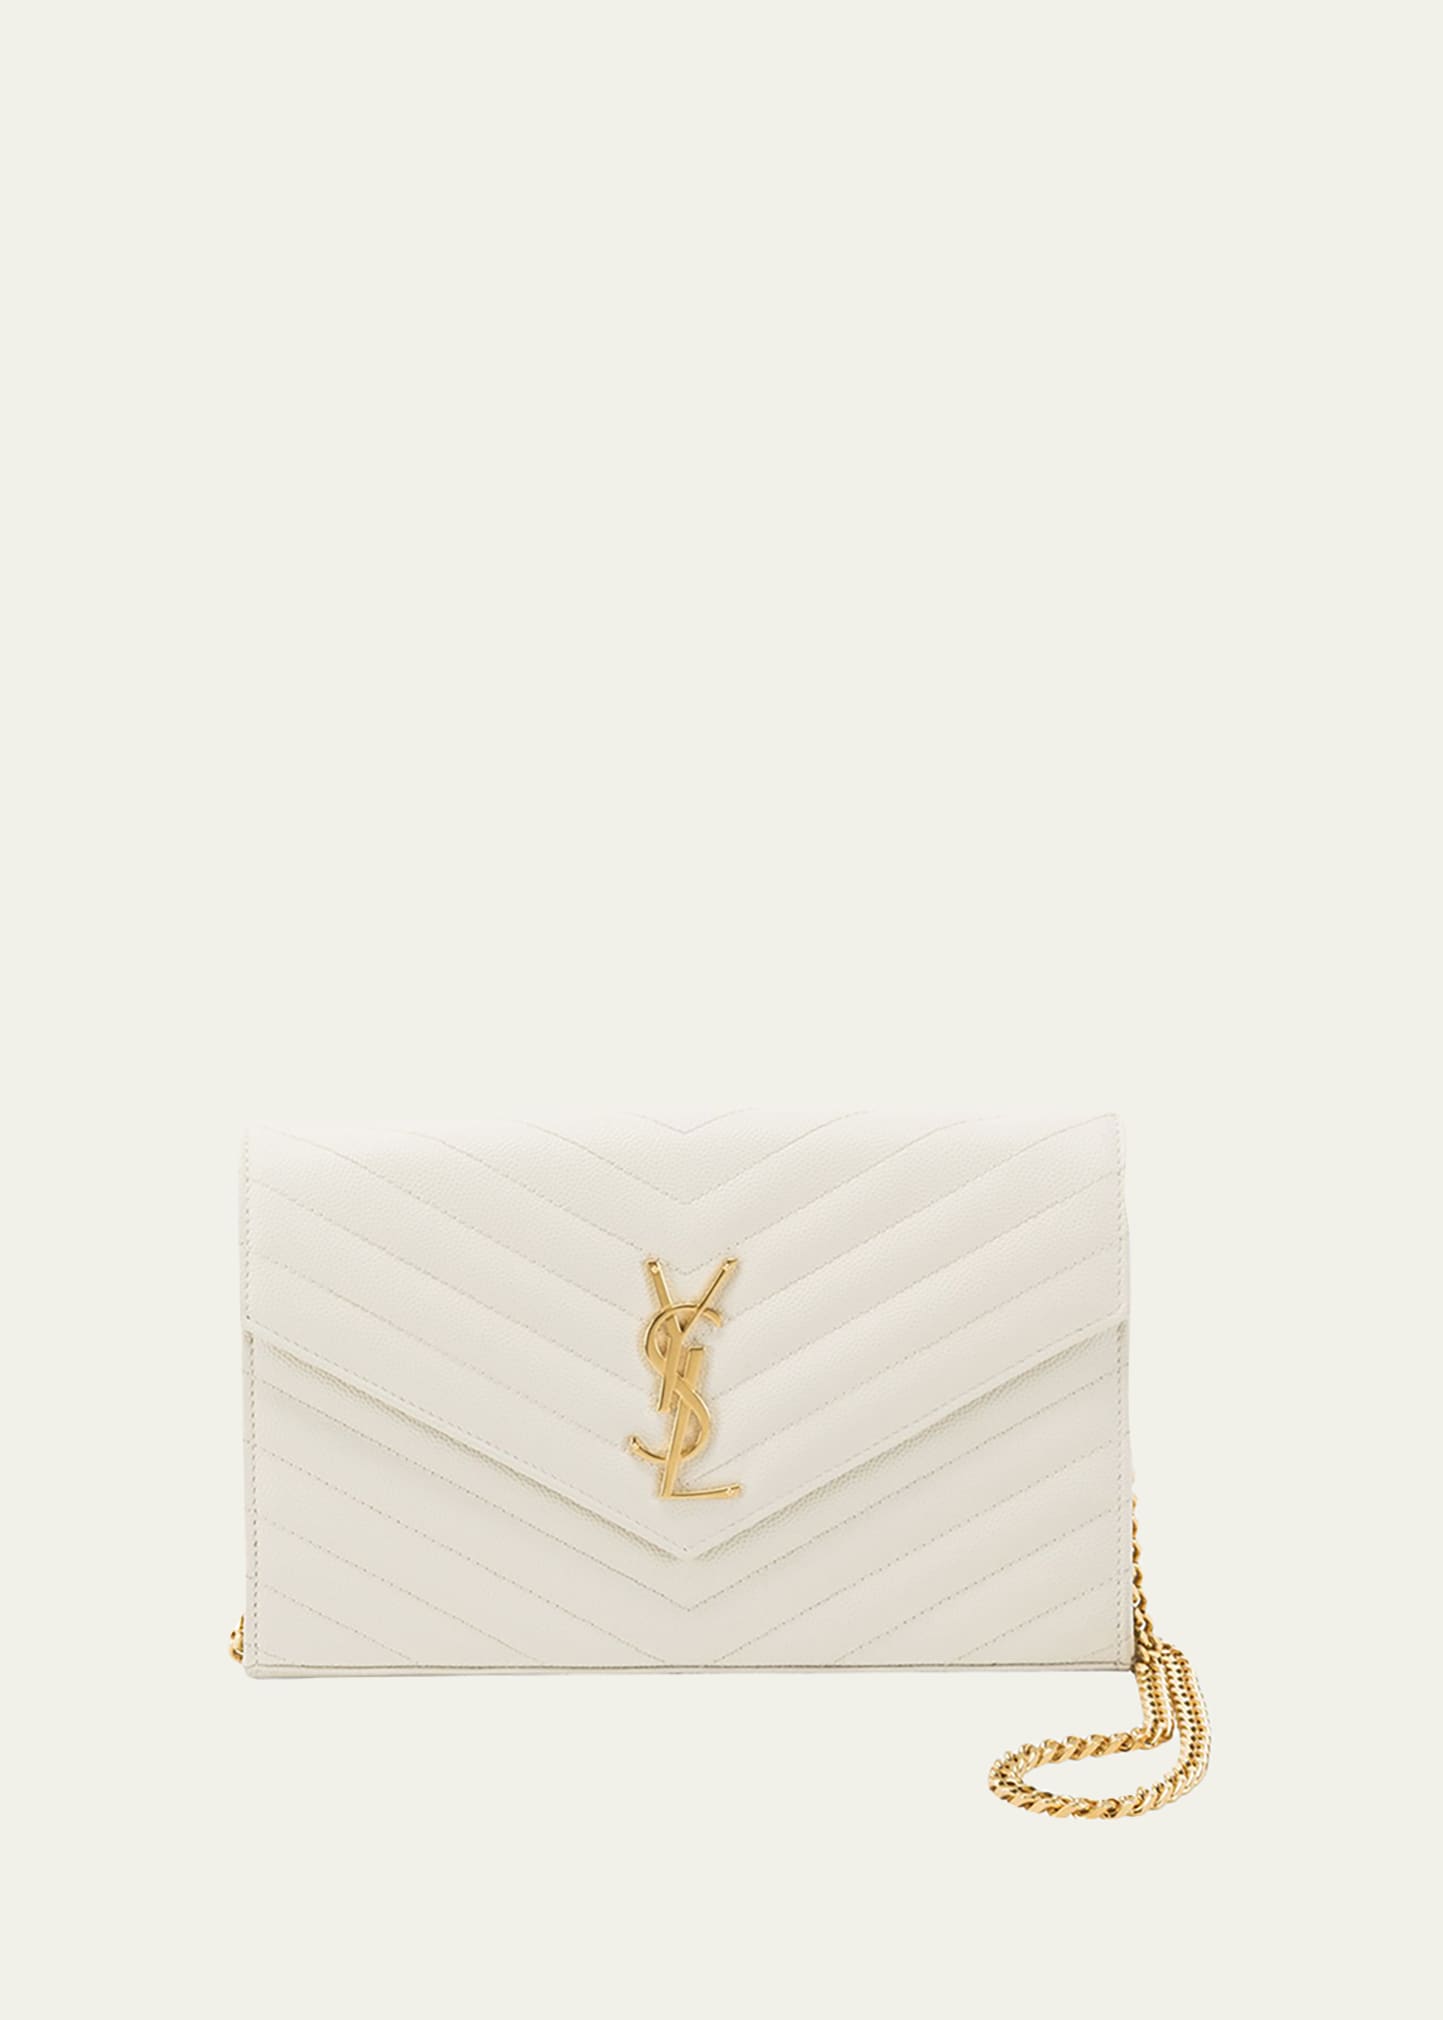 Saint Laurent YSL Monogram Large Wallet on Chain in Grained Leather | Bergdorf Goodman